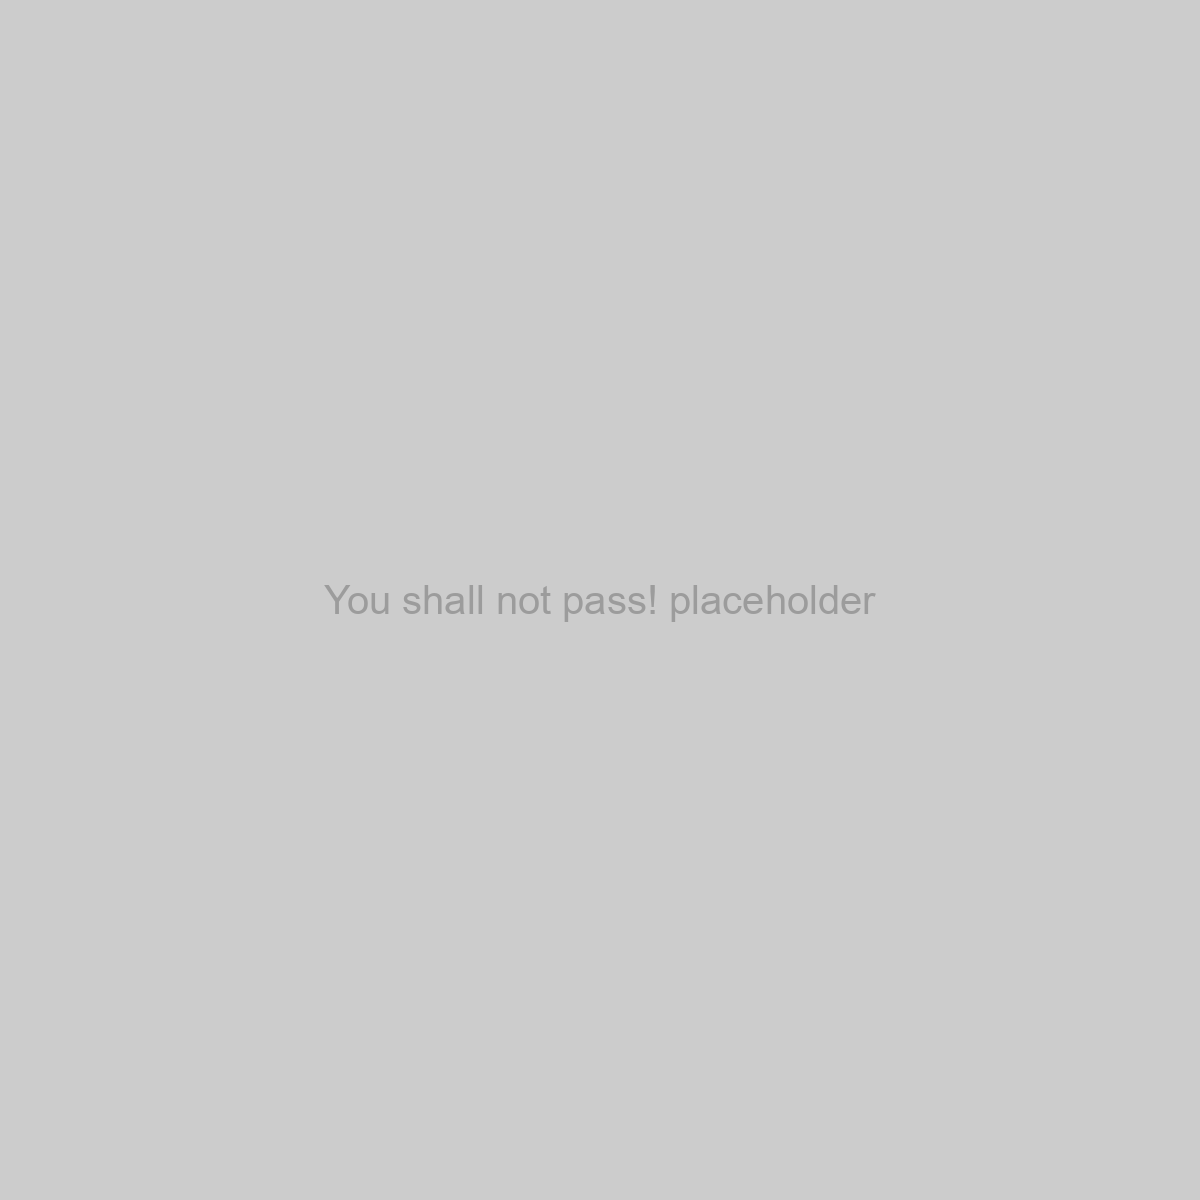 You shall not pass! Placeholder Image